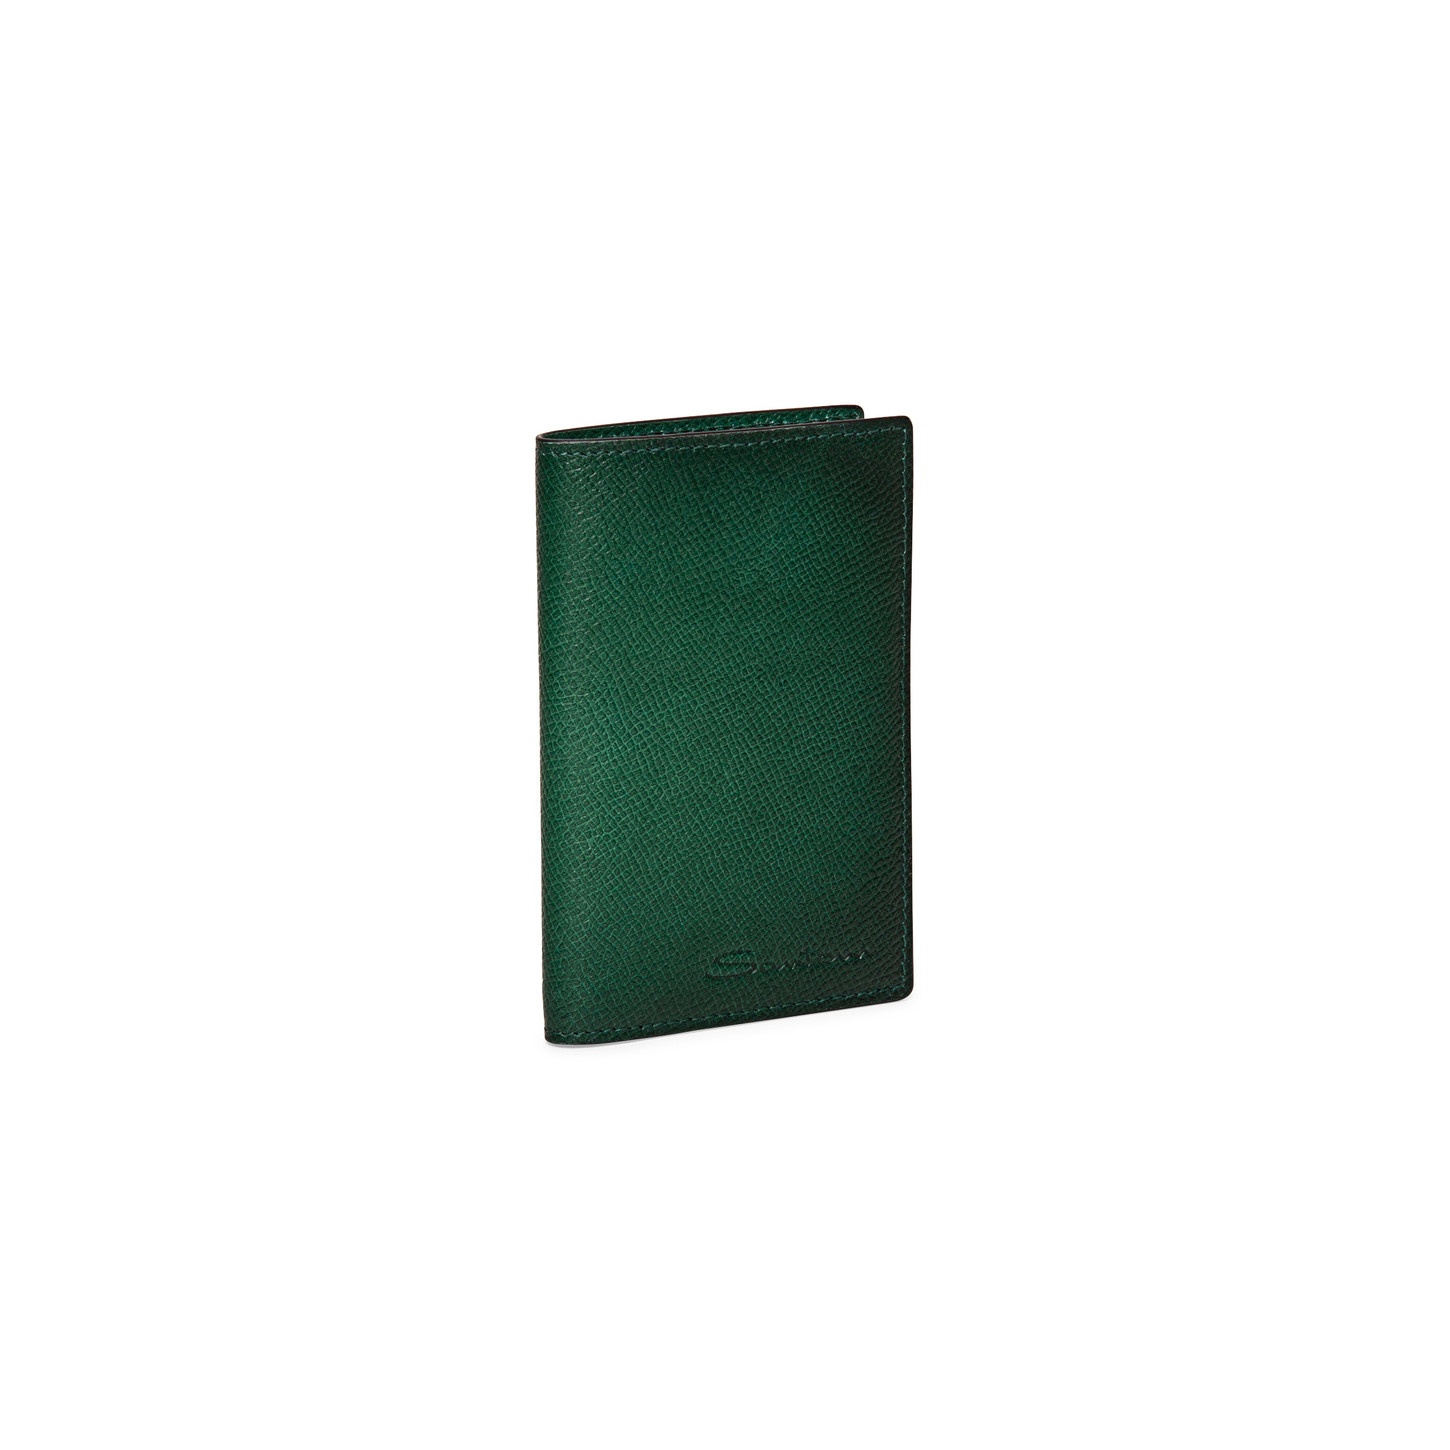 Green saffiano leather vertical wallet - 4